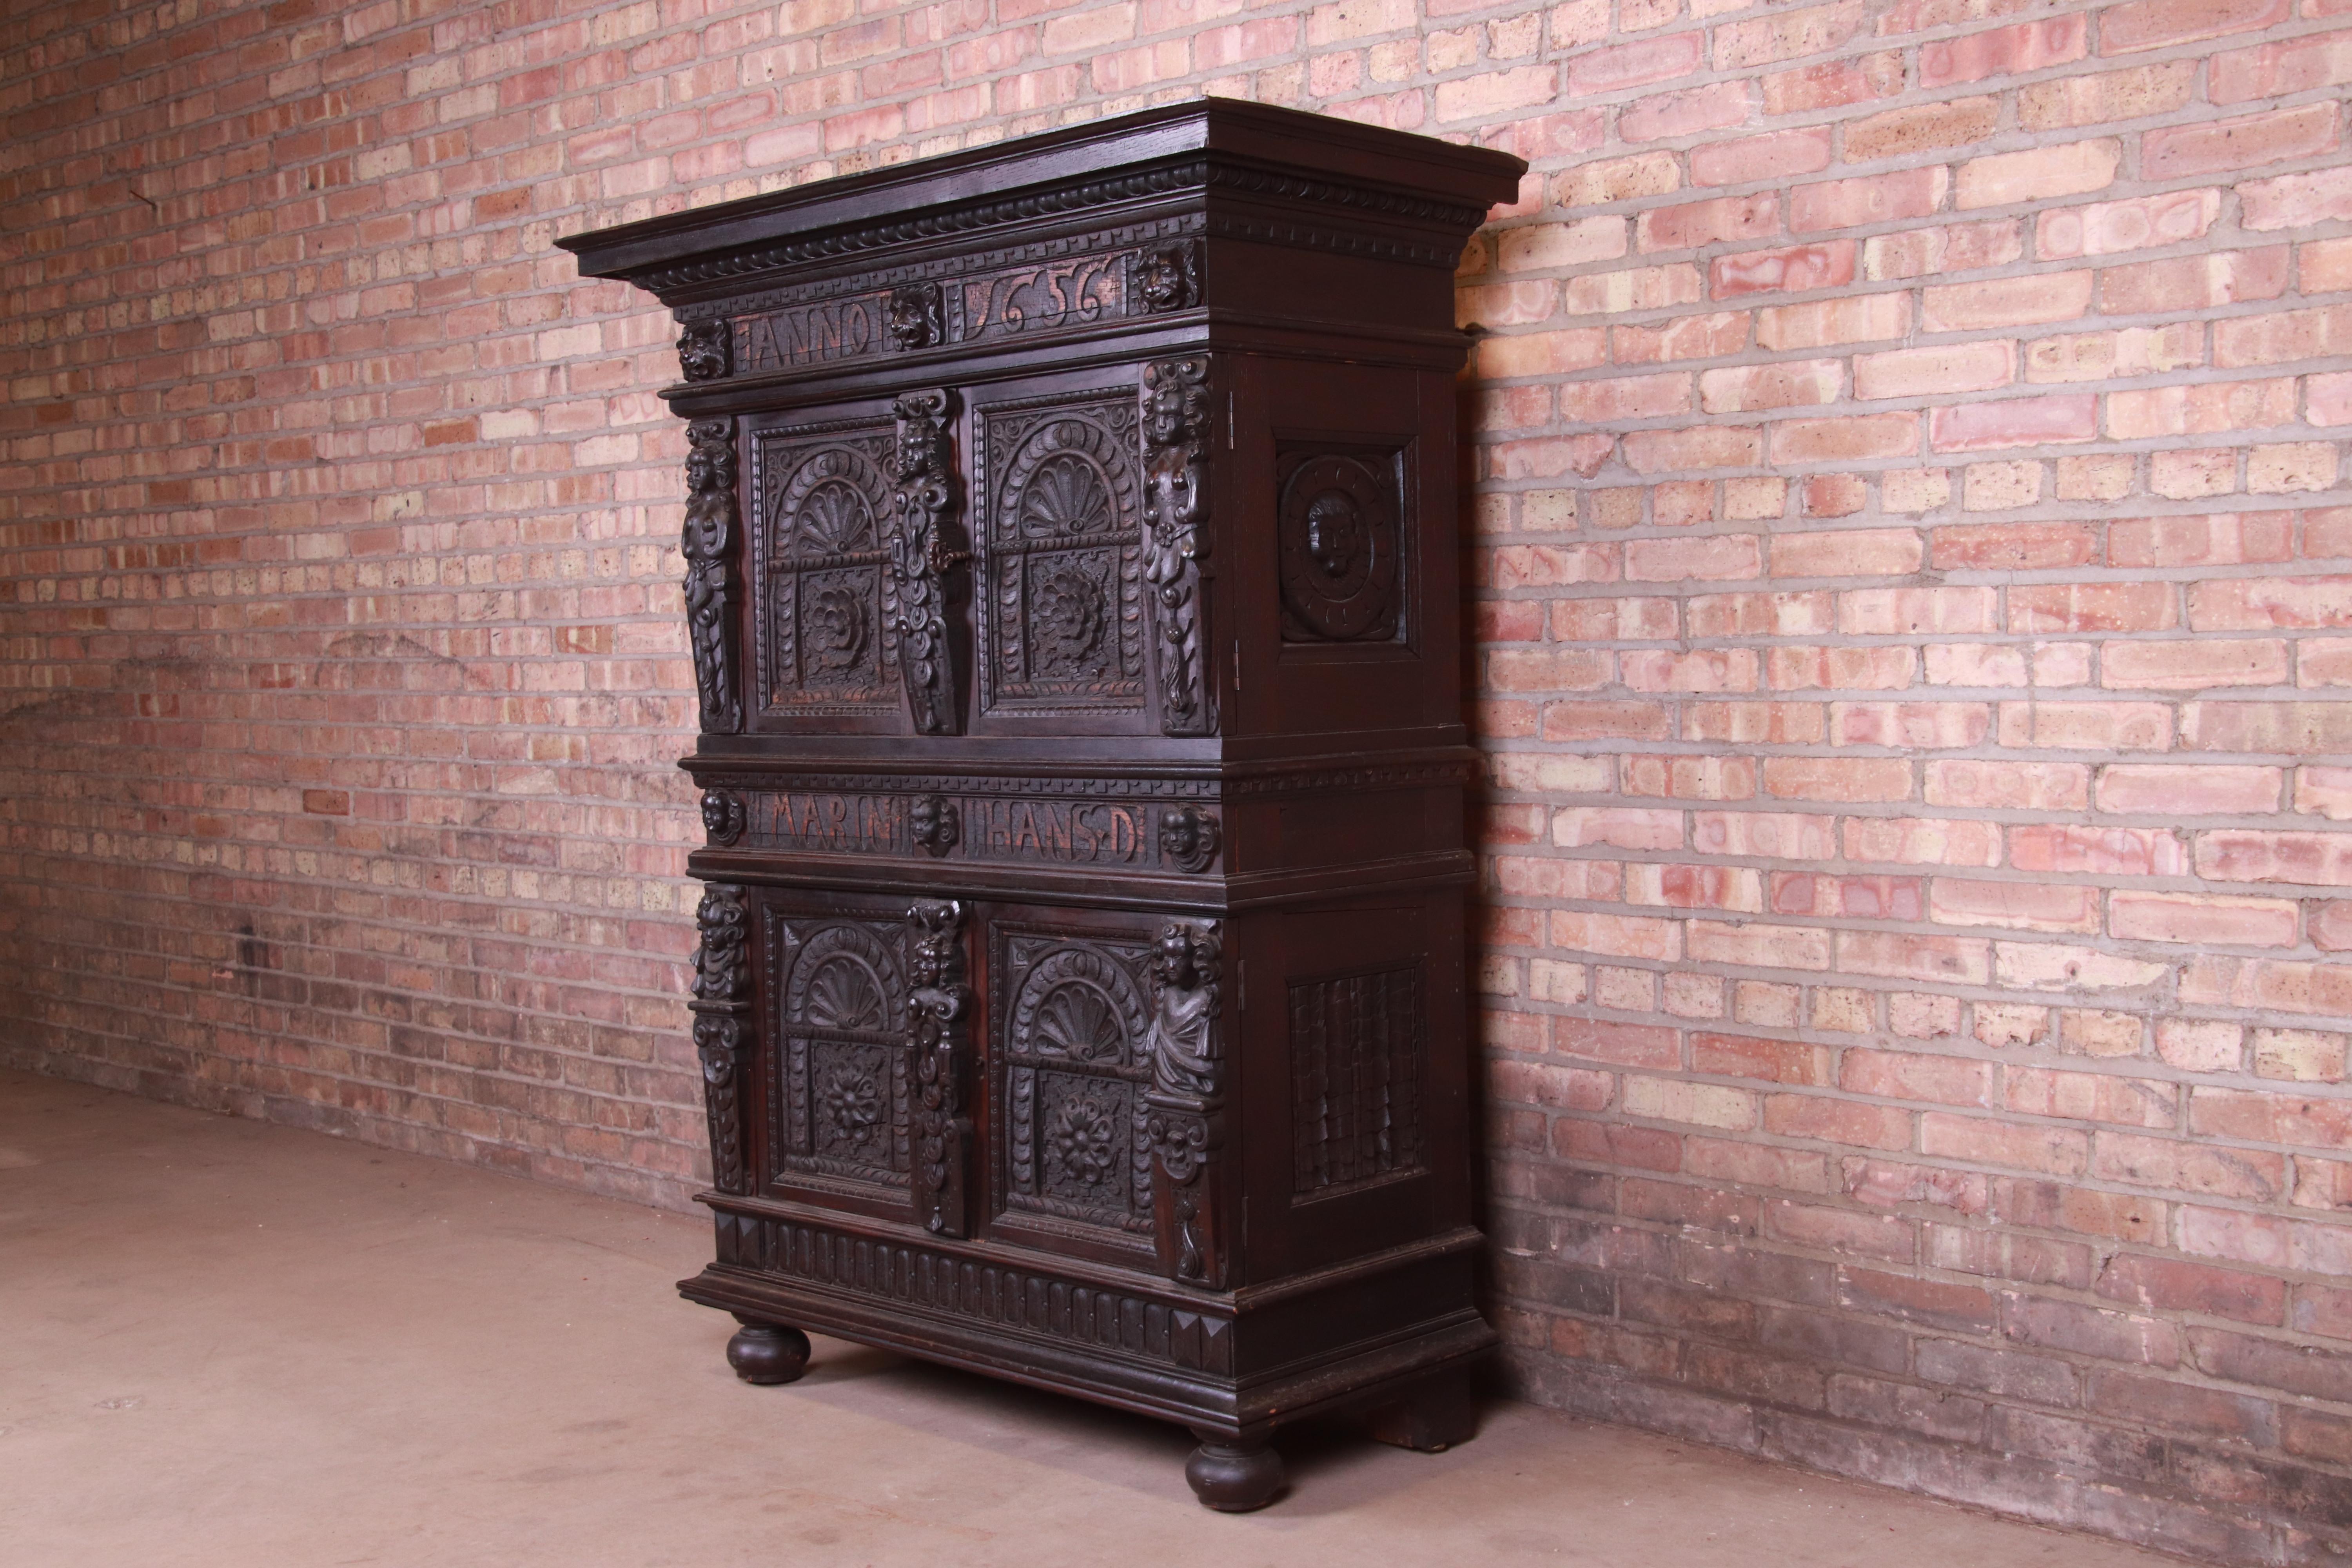 An exceptional 19th century Italian Renaissance Revival ornate carved oak cupboard or bar cabinet

Italy, circa 1880s

Measures: 49.75